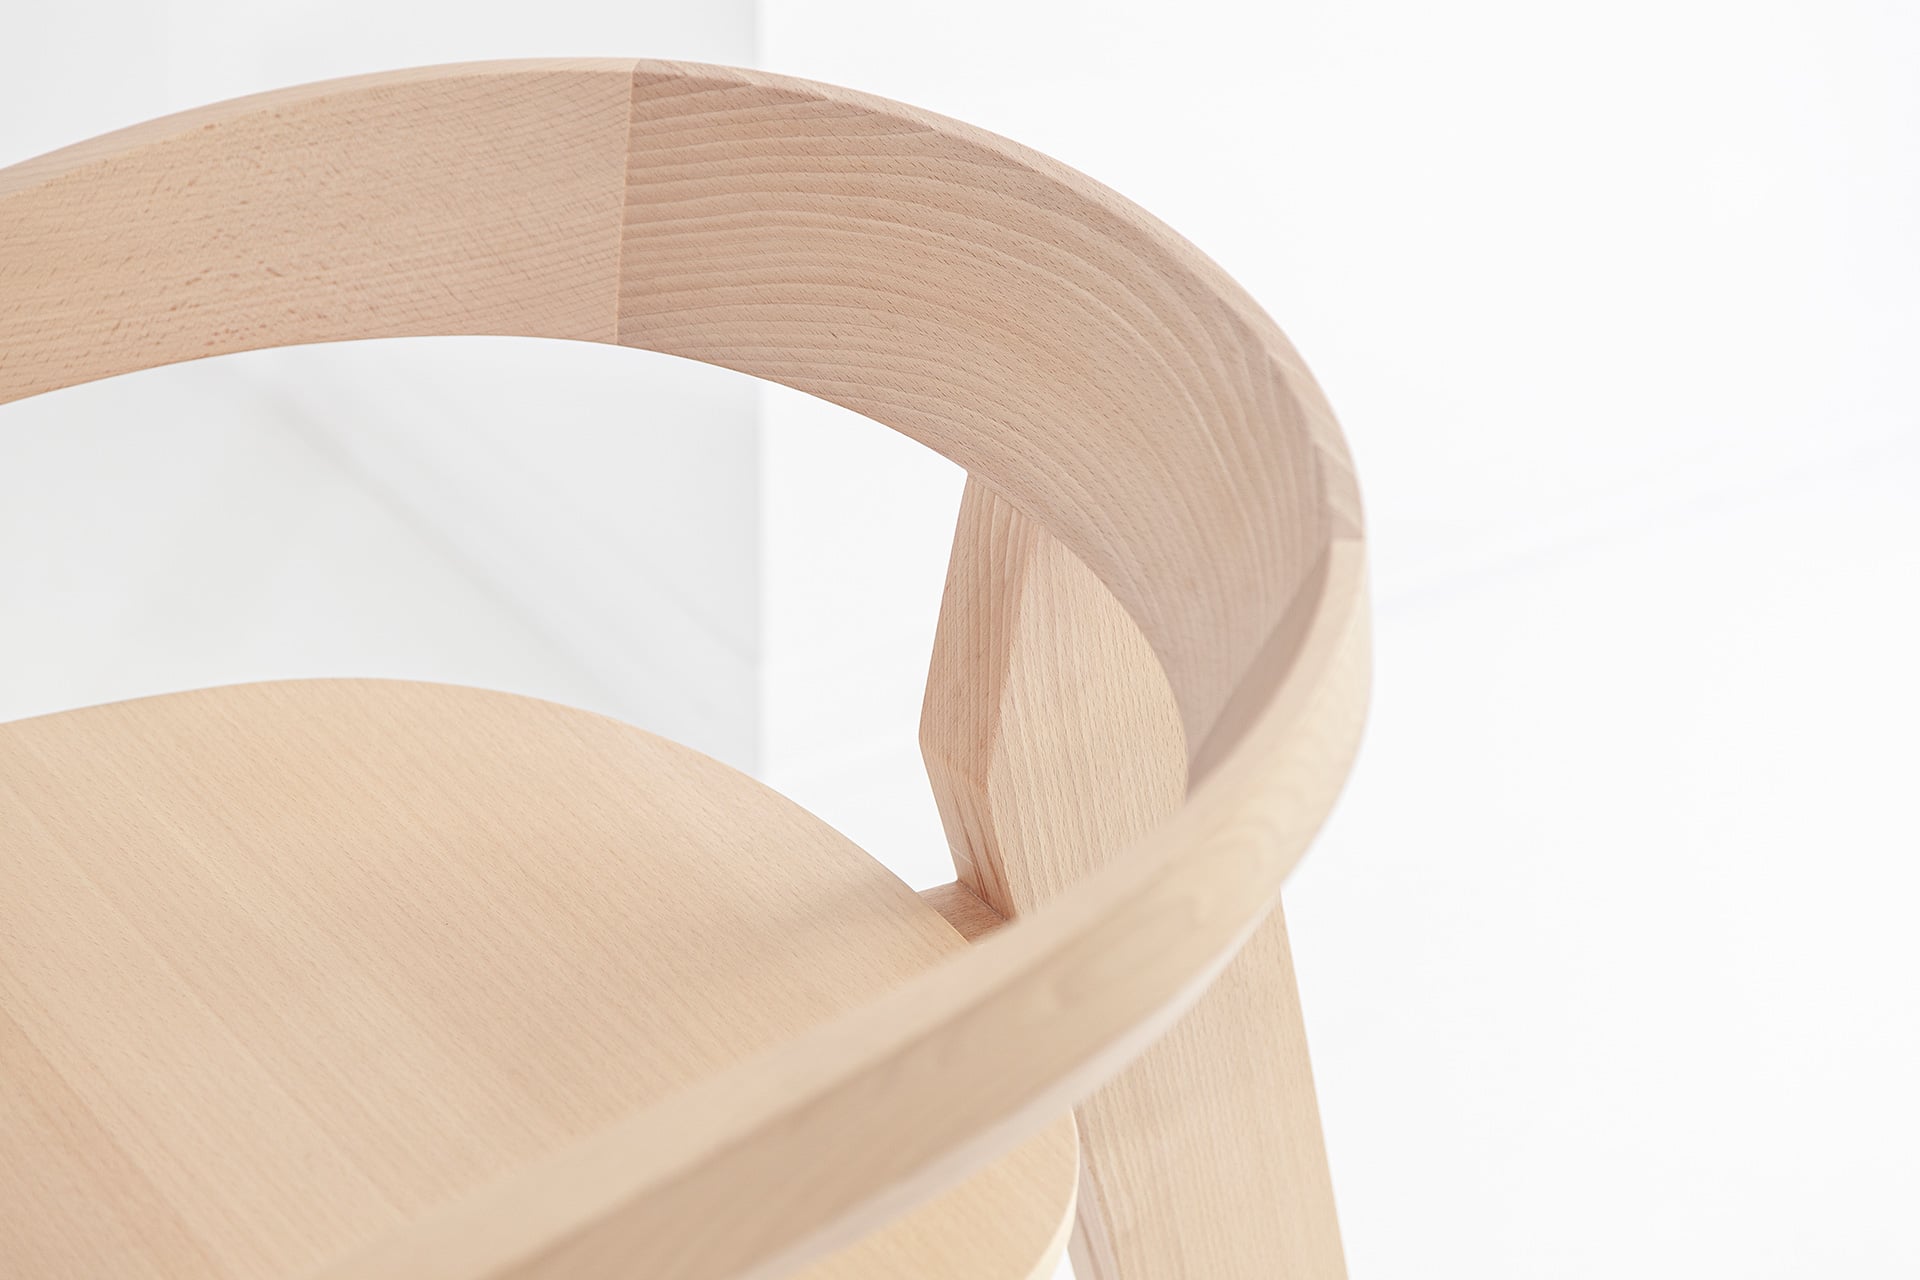 Contemporary wooden chairs